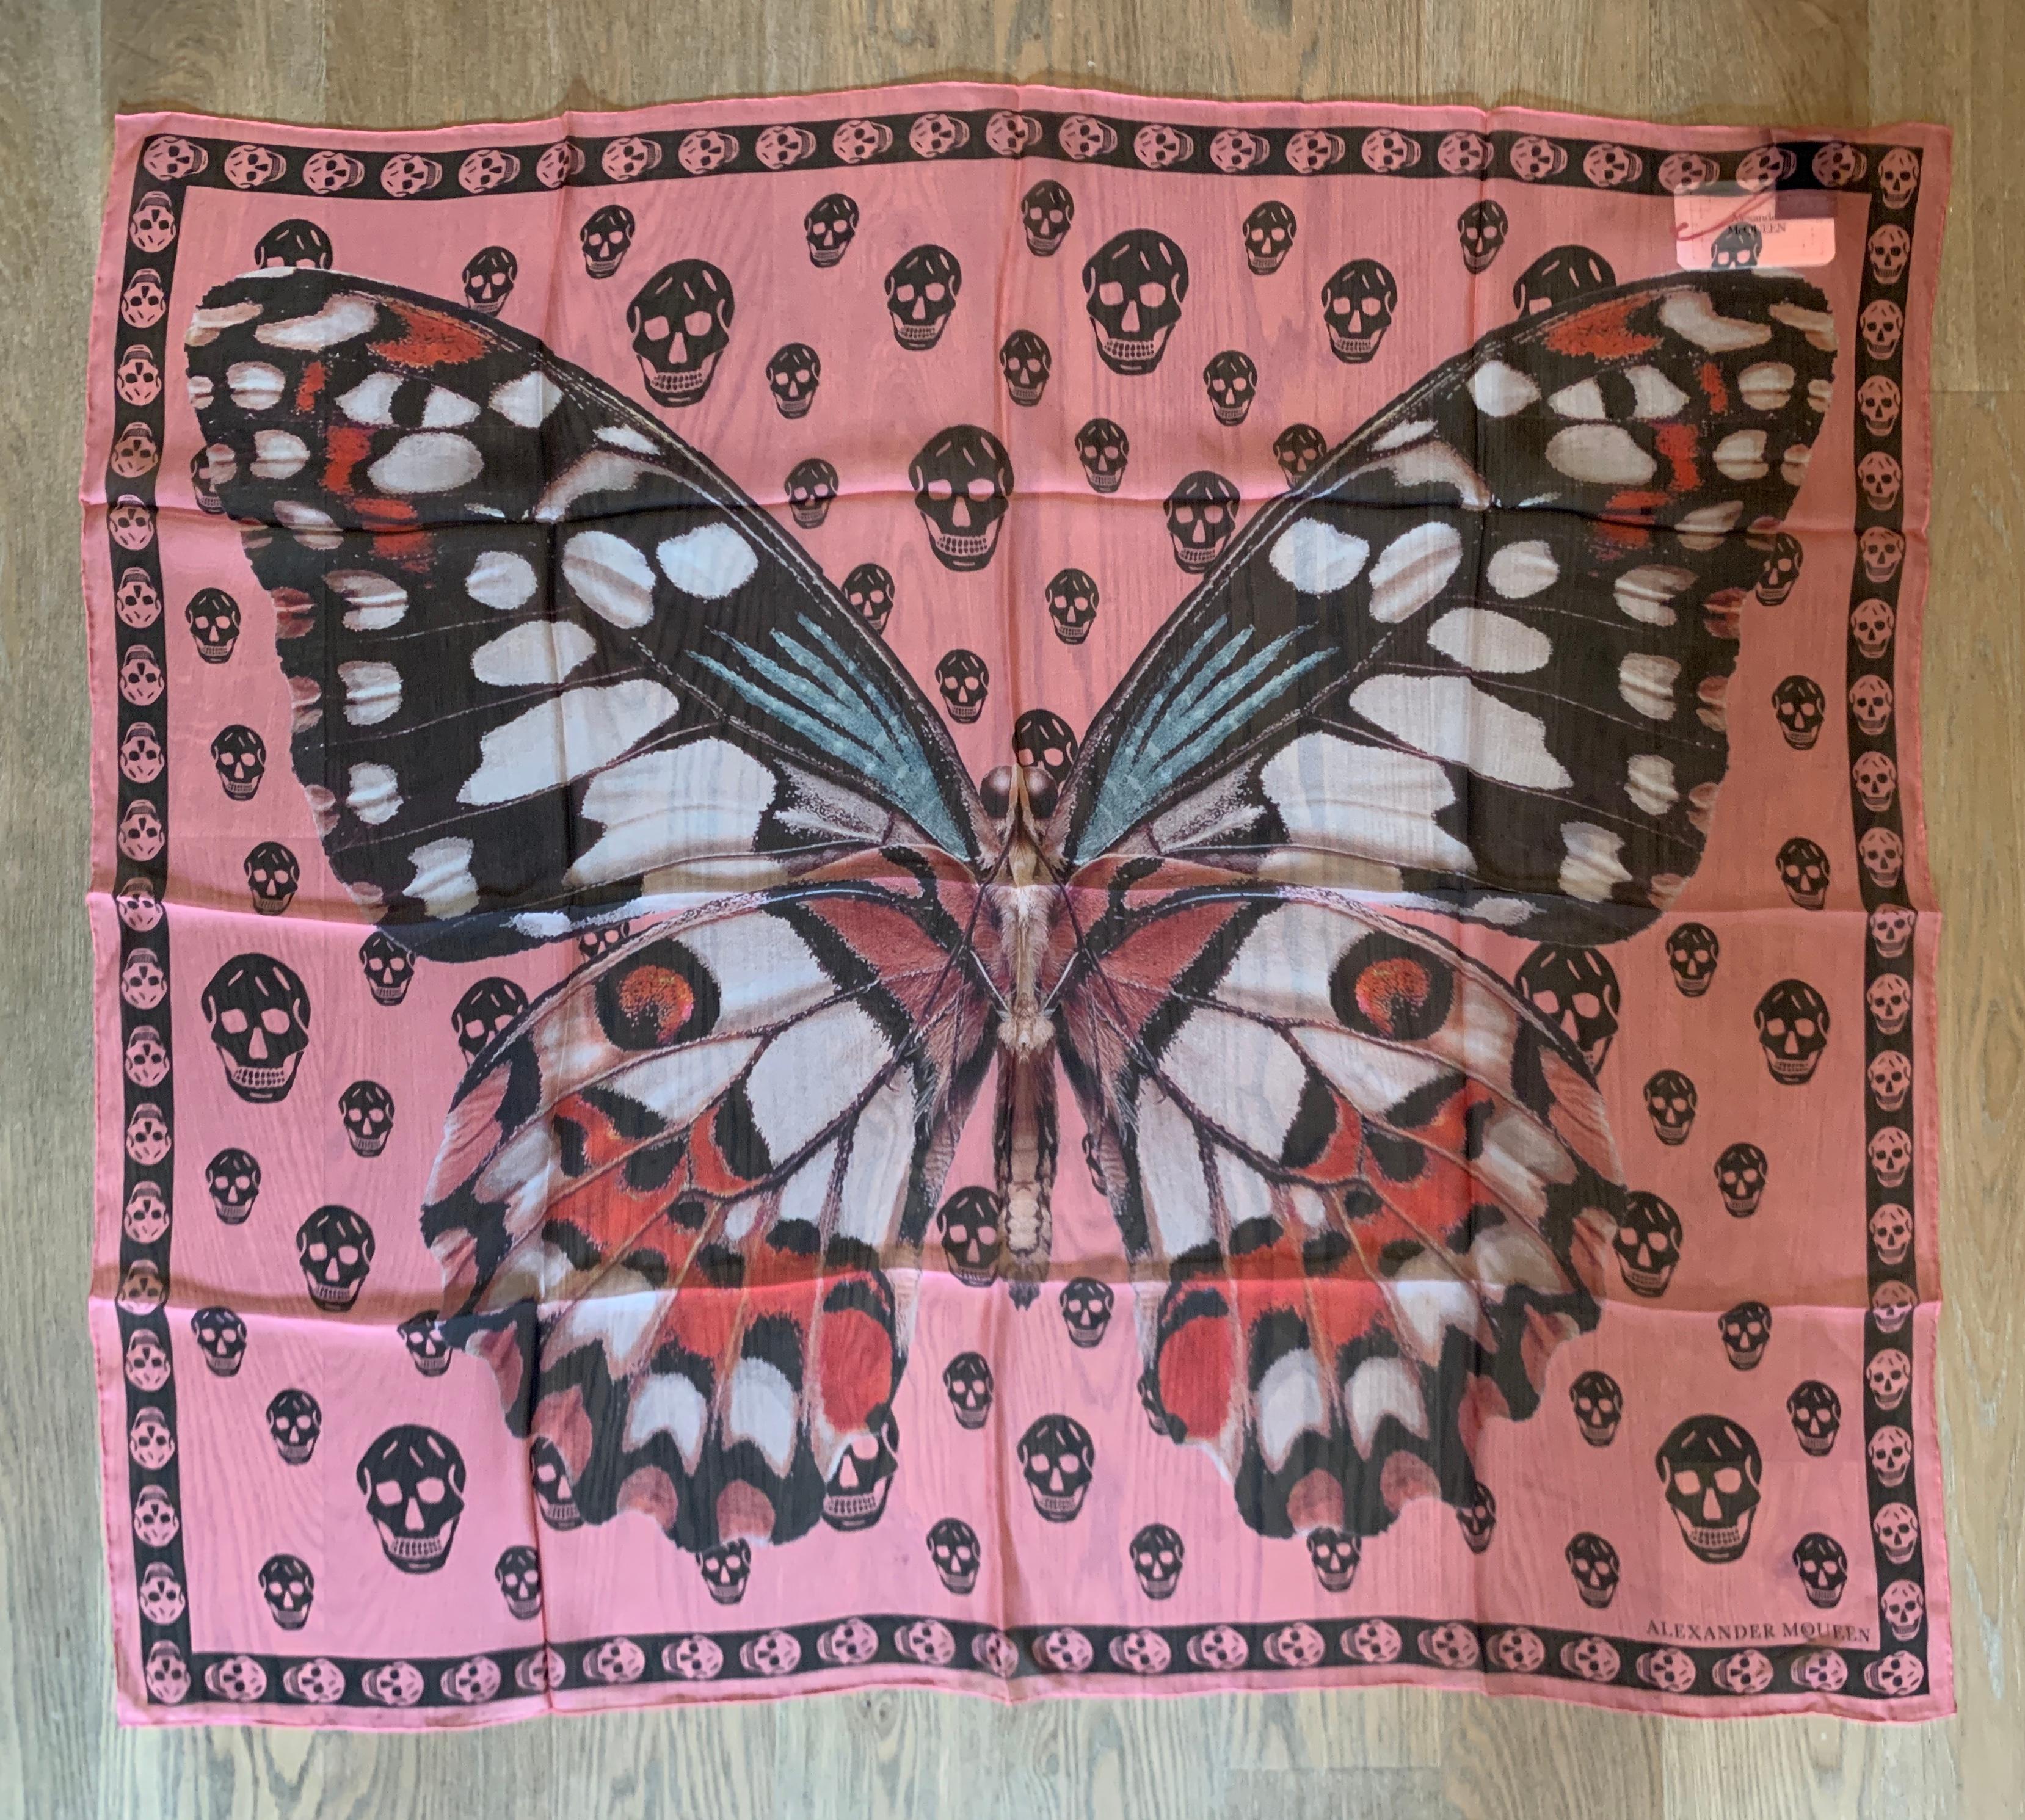 New Alexander McQueen large semi-sheer scarf featuring giant butterfly or moth with black skull print throughout background. Signed Alexander McQueen in logo at bottom corner. 

Purchased directly from McQueen store.

100% silk.

Approximately 41